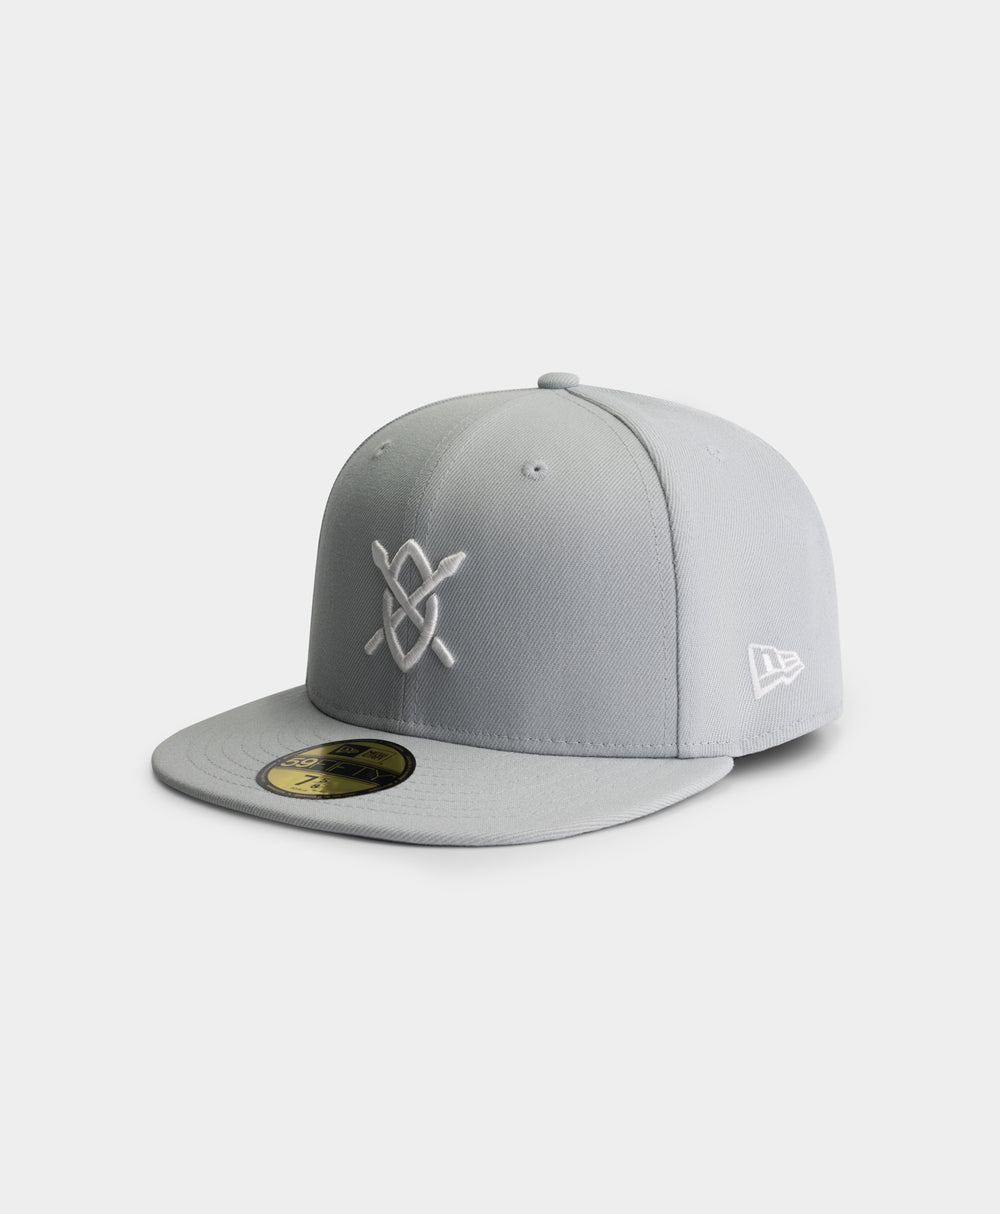 DP - Snow Grey Daily Paper x New Era 59FIFTY Fitted Cap - Packshot - Front